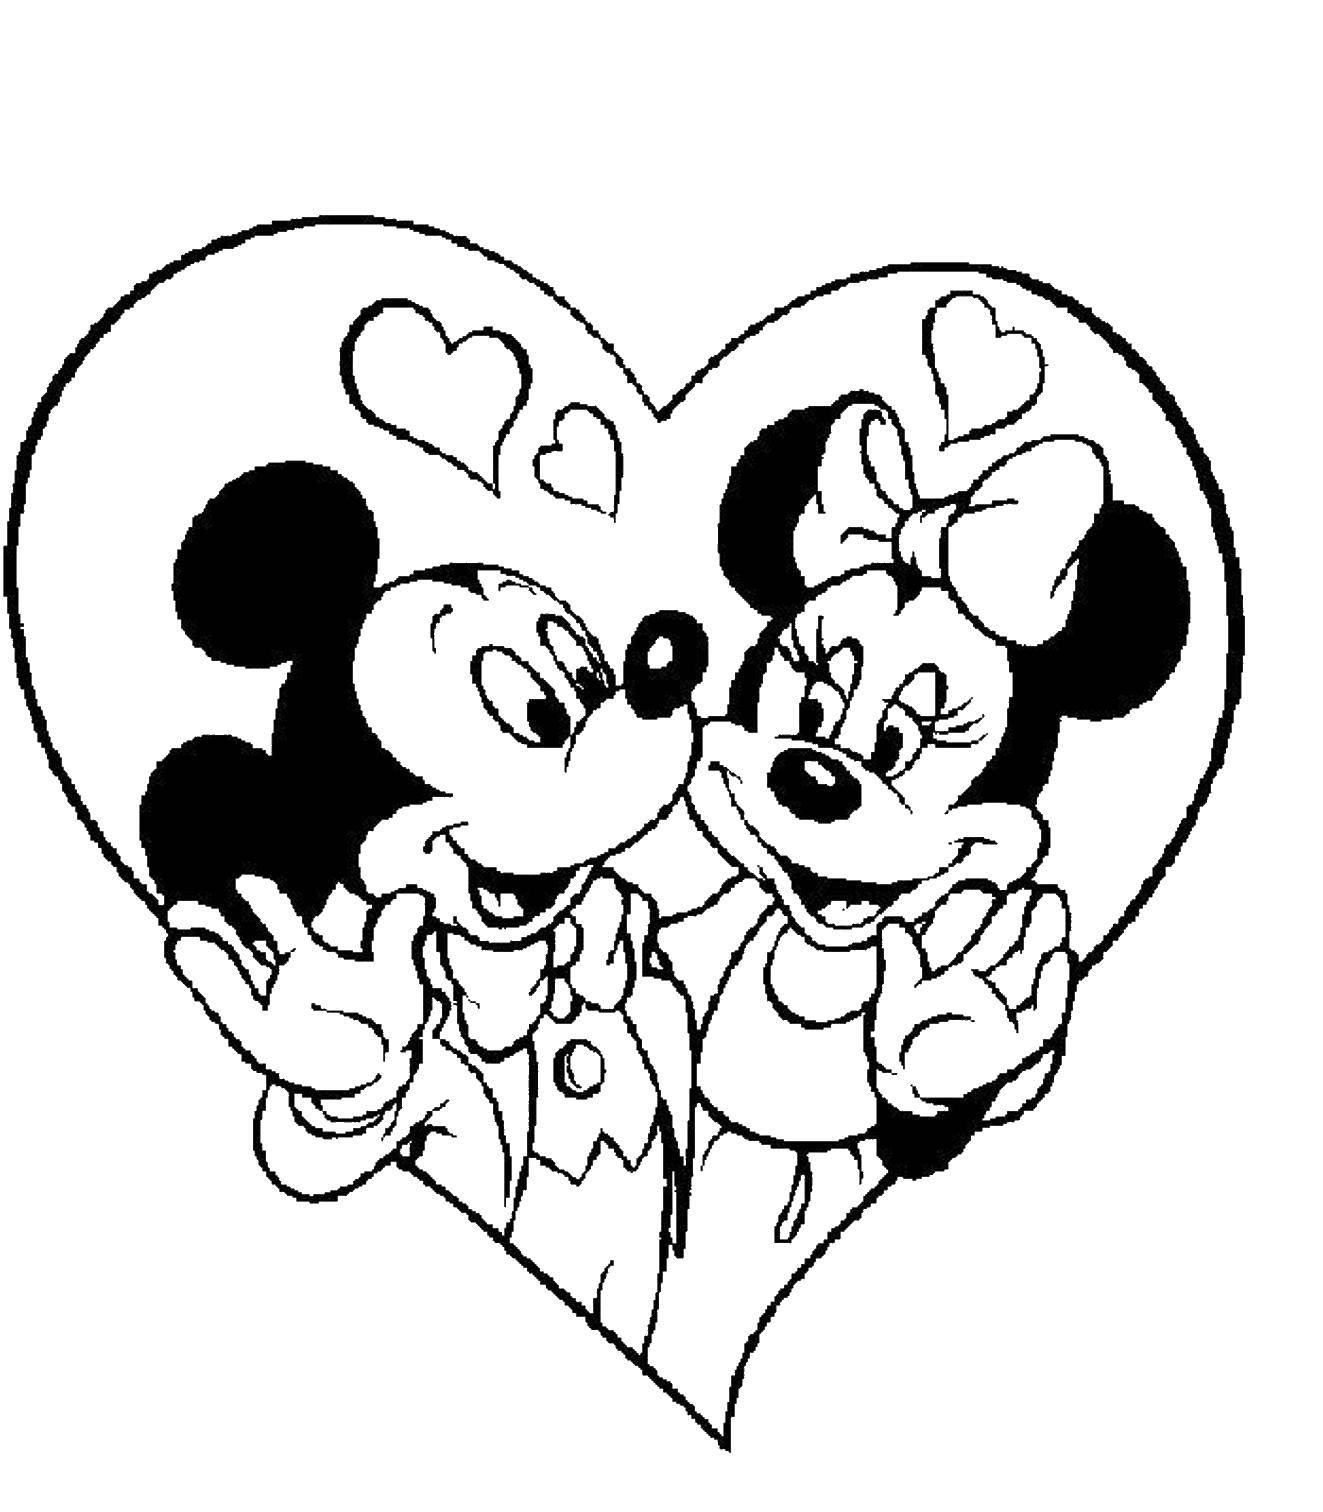 Coloring Sweethearts Mickey and Minnie mouse. Category Disney coloring pages. Tags:  Disney, Mickey Mouse, Minnie Mouse.